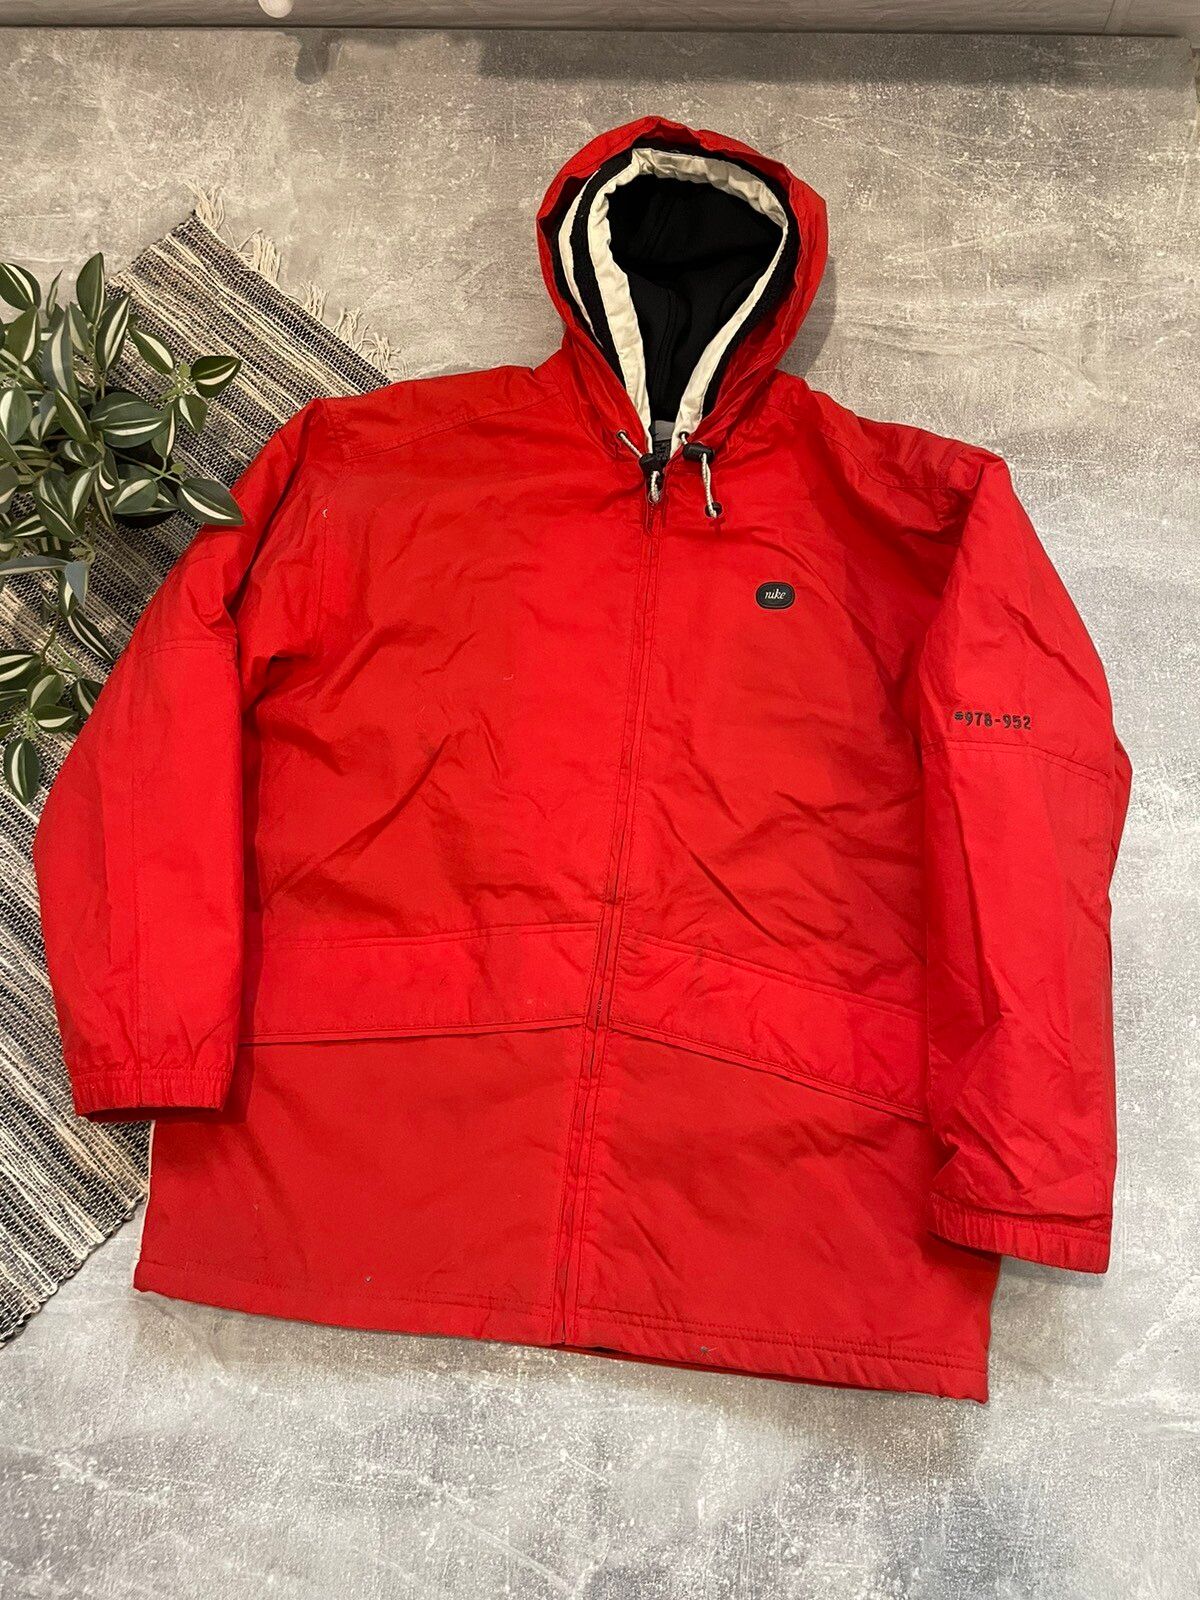 Pre-owned Nike X Outdoor Life Nike Jacket Coat Parka Swoosh Tn Acg Shox Court Gorpcore In Red